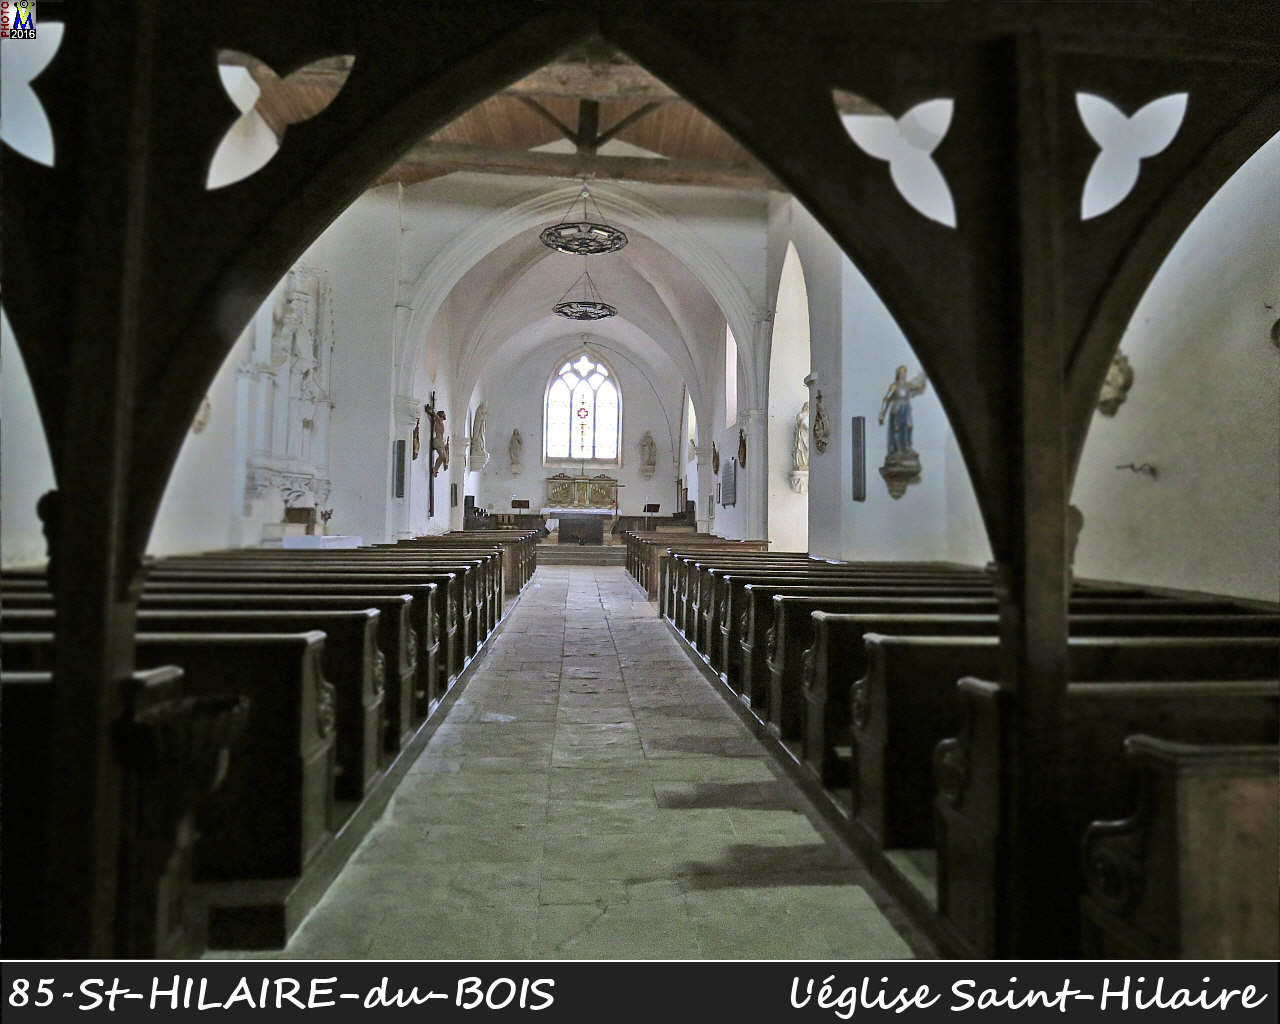 85CAILLERE-StHILAIRE-HILAIRE_eglise_1200.jpg